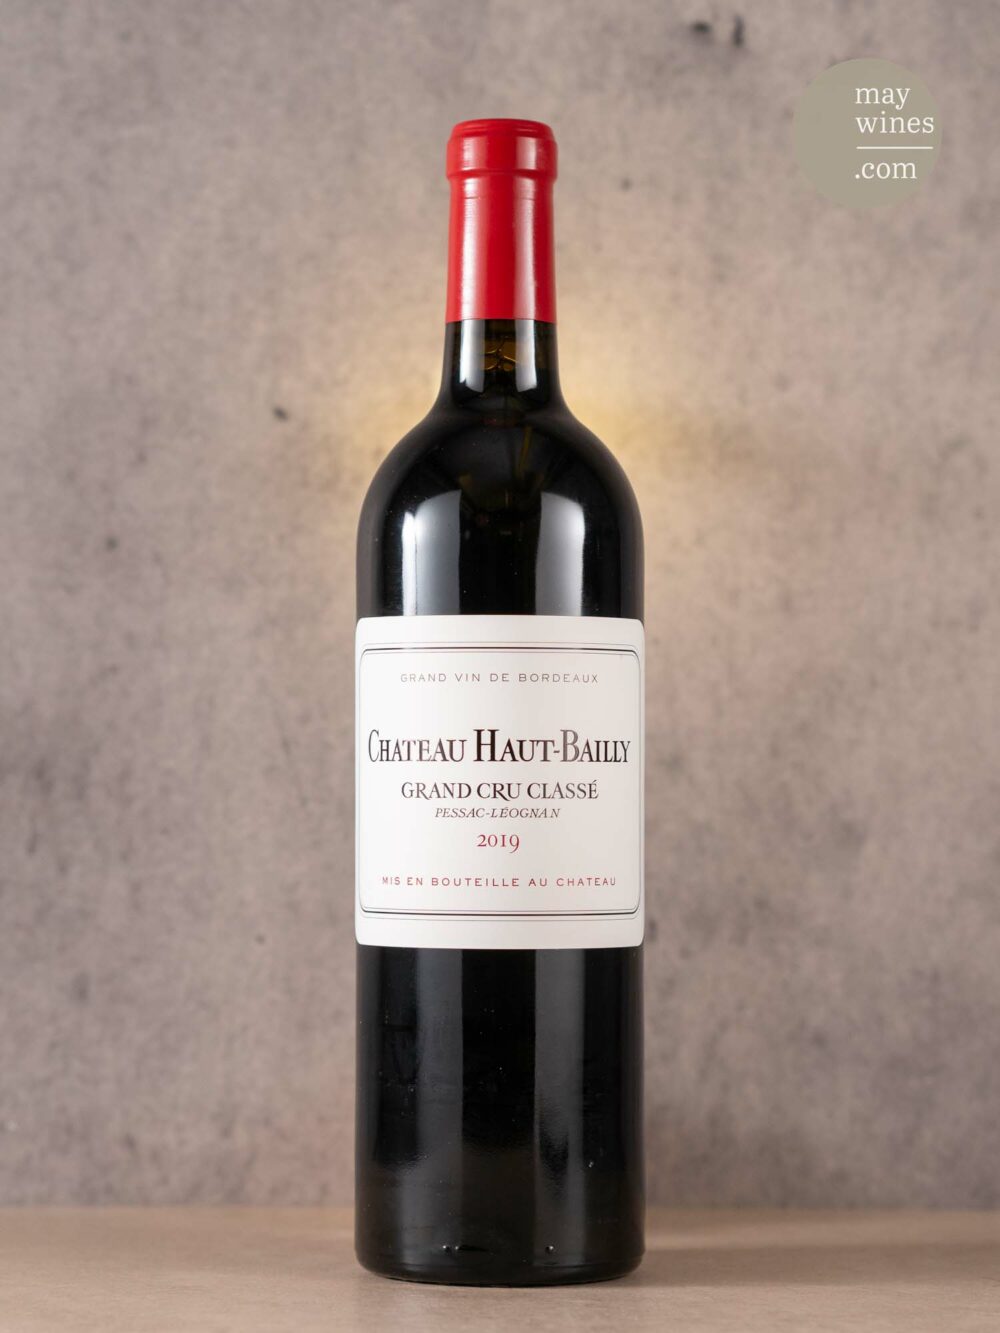 May Wines – Rotwein – 2019 Château Haut-Bailly